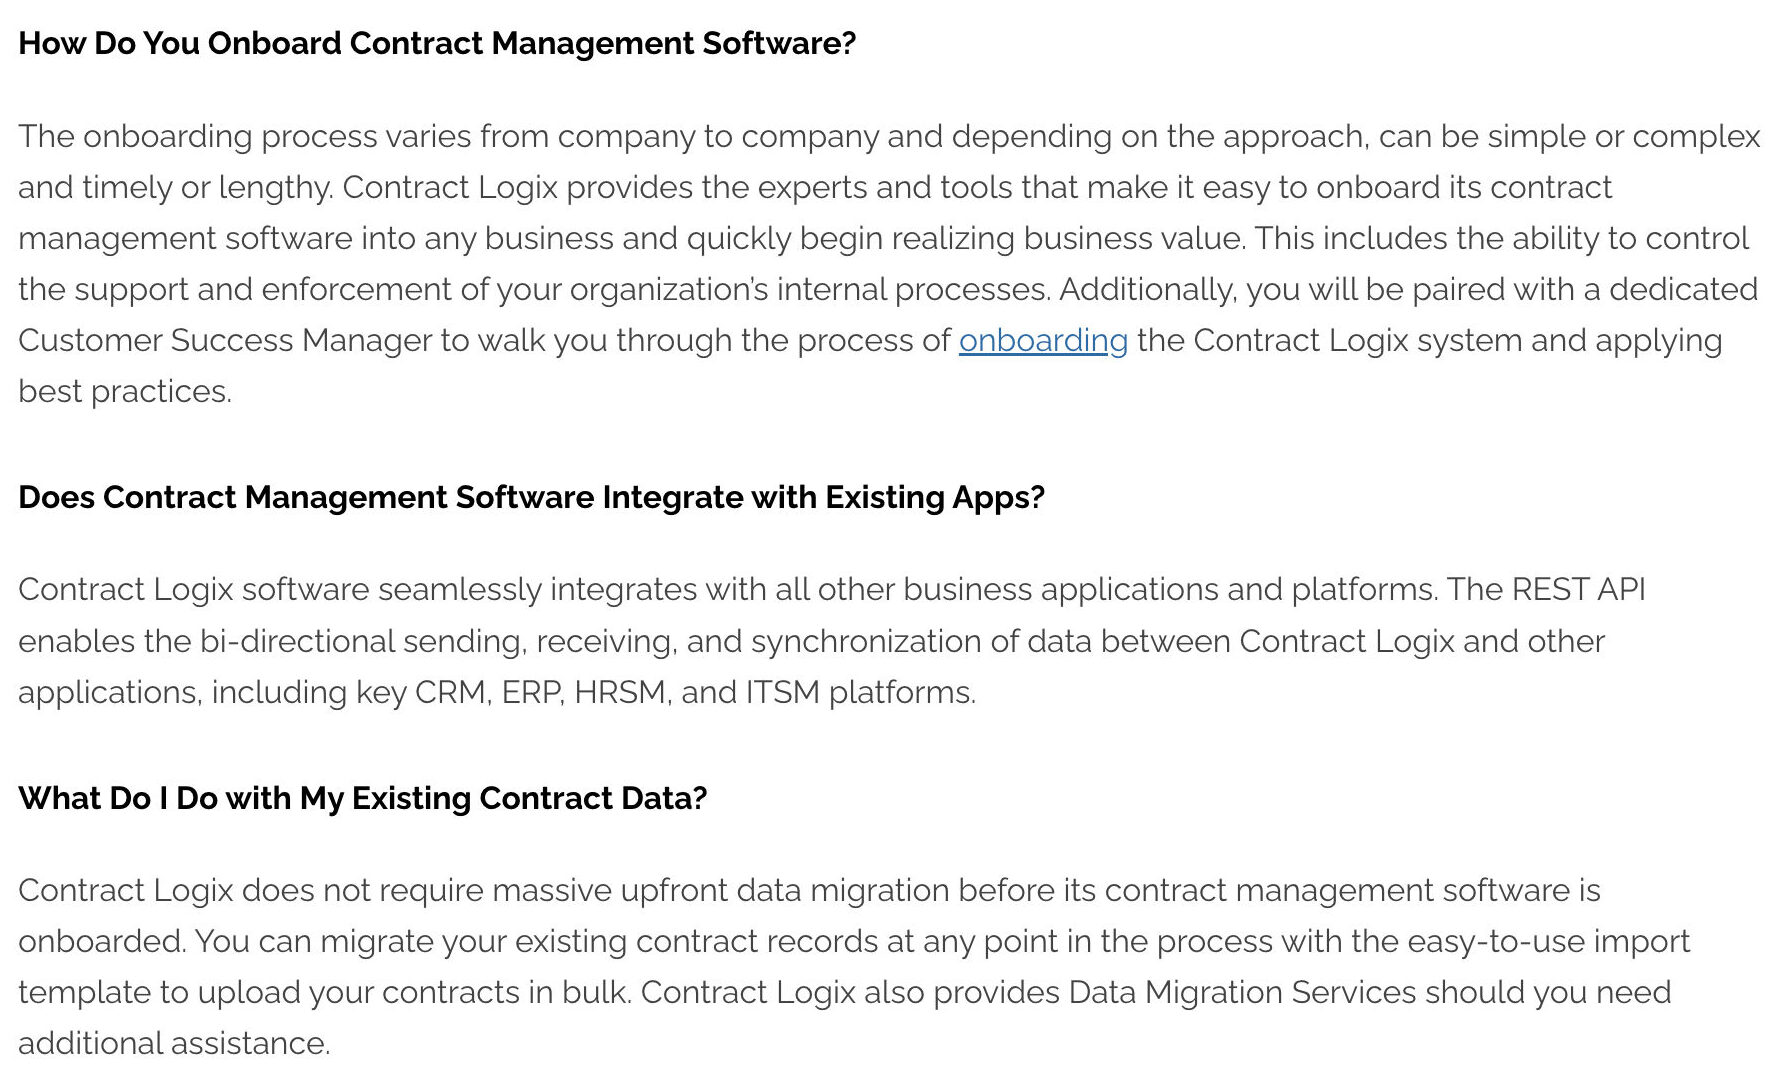 Example of FAQs for contract management software.